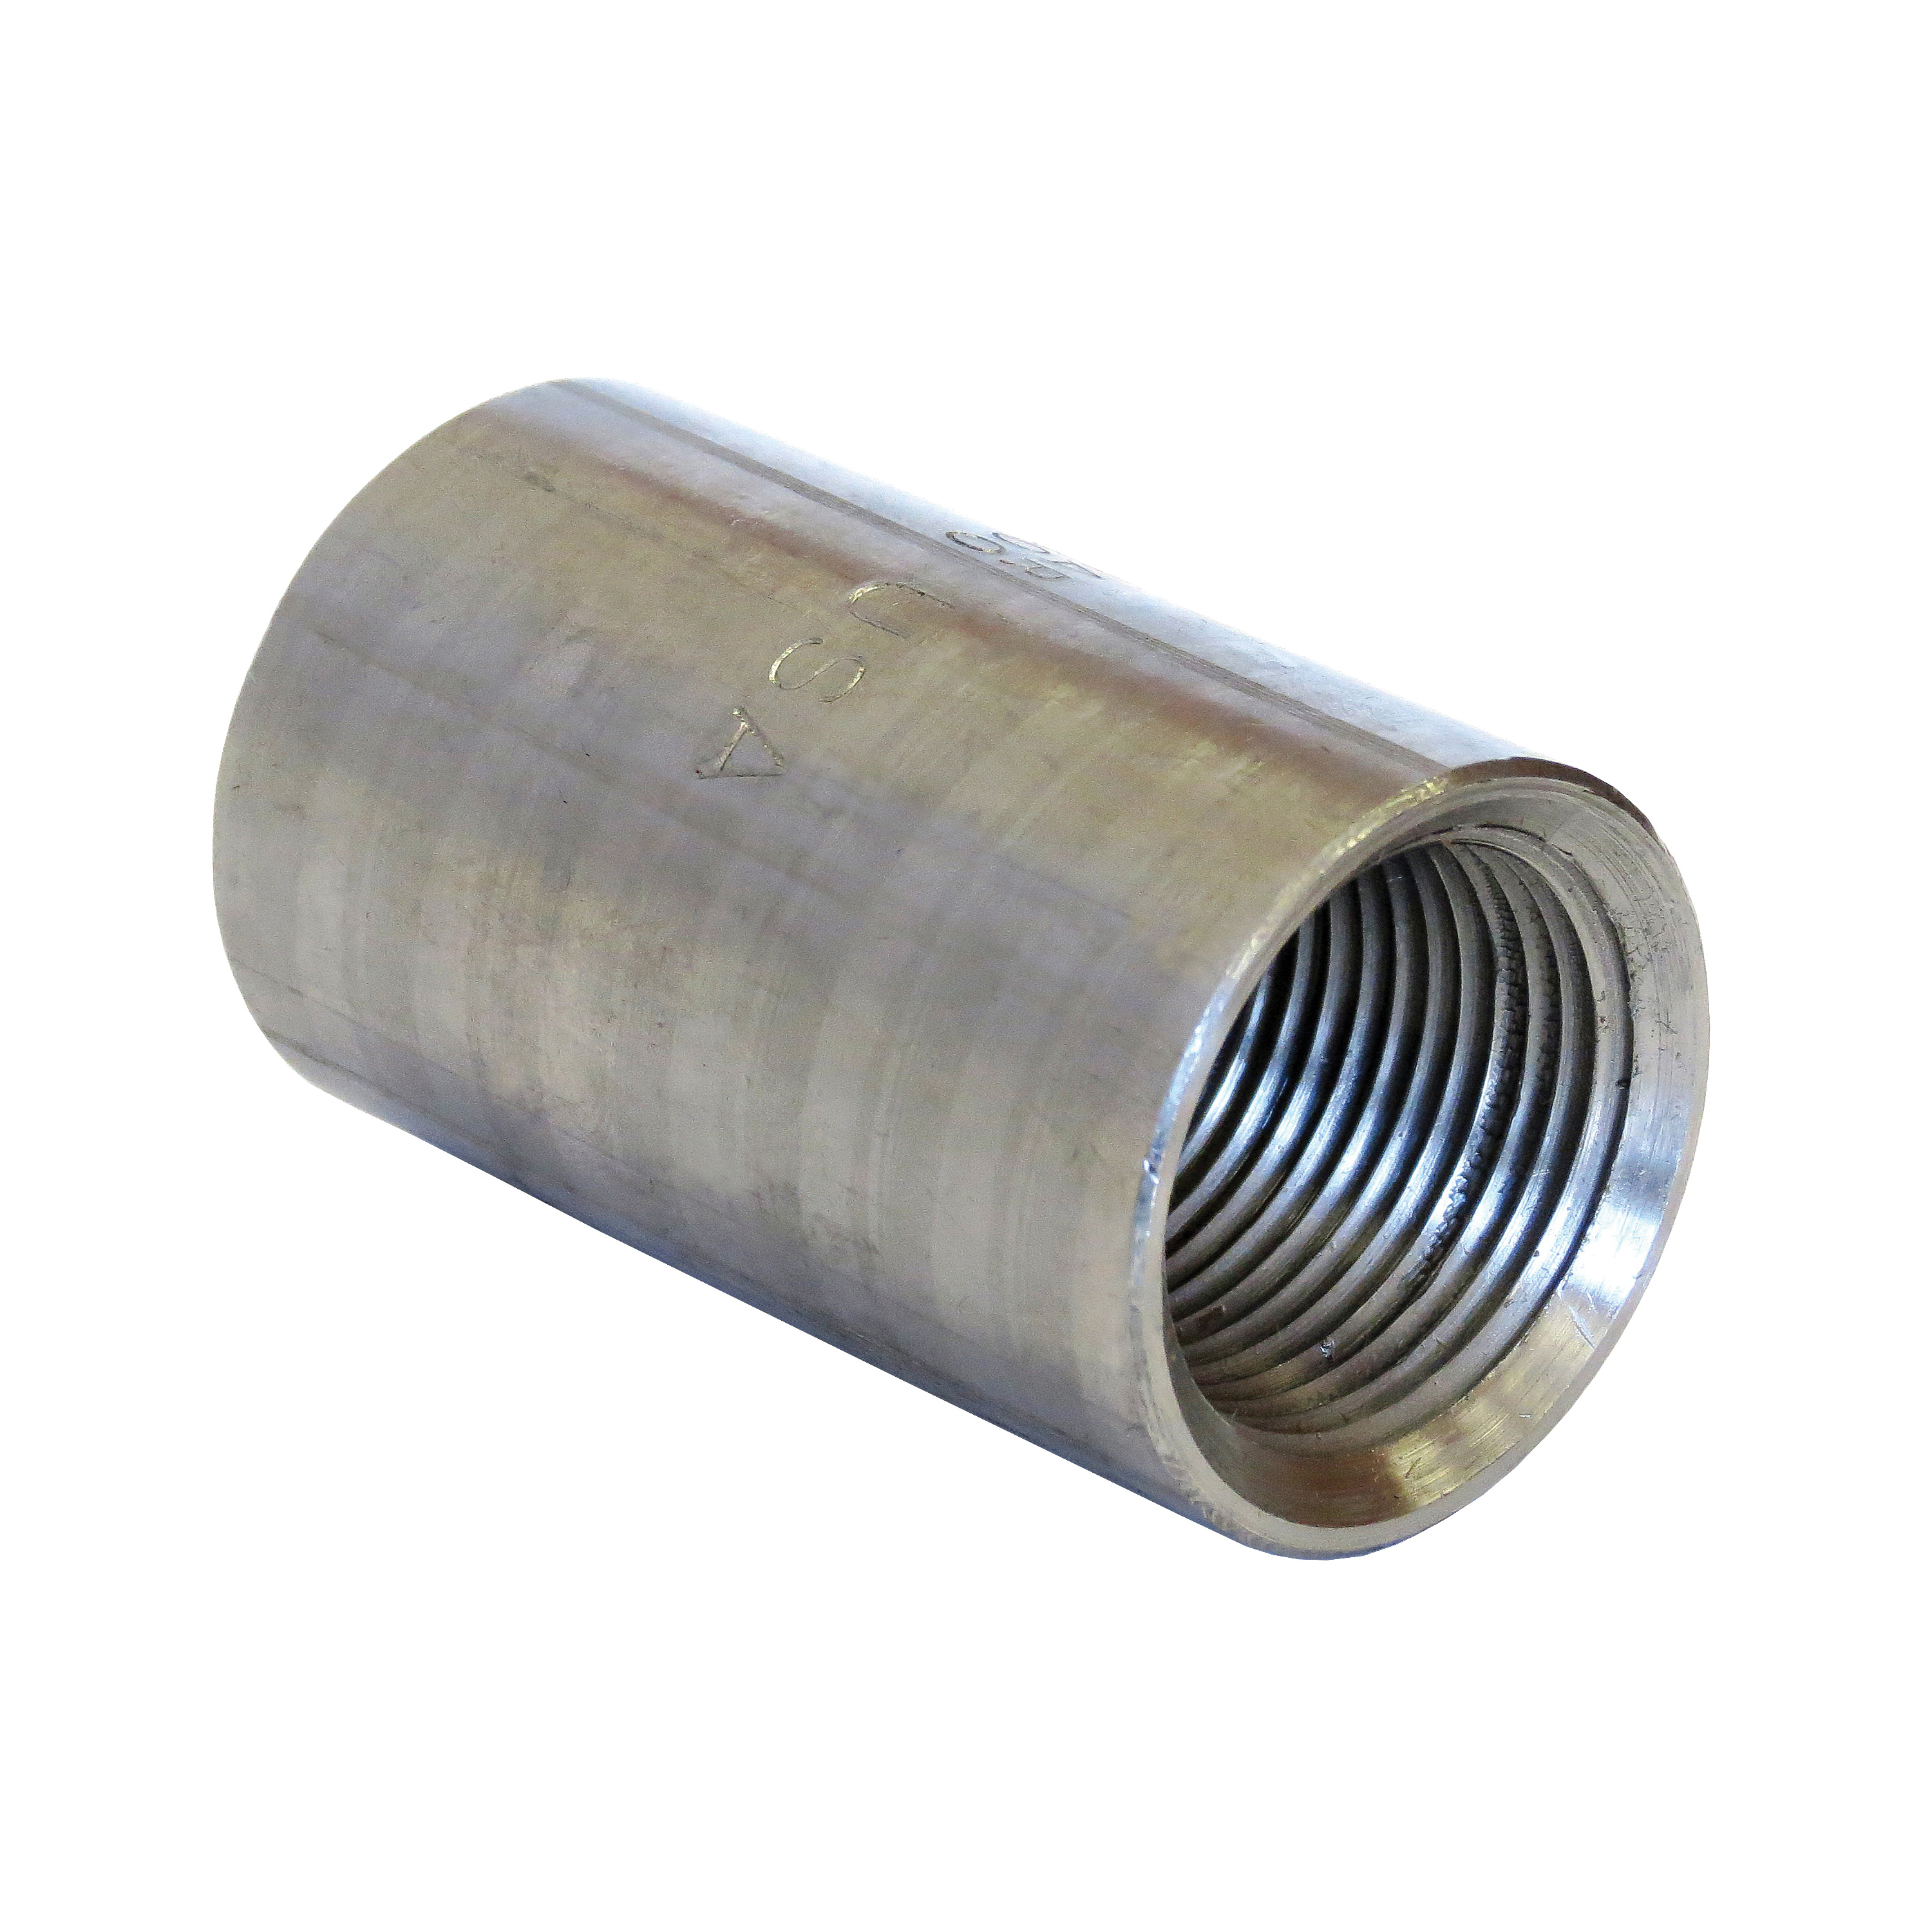 0321200503 Taper Tapped Pipe Coupling, 1 in, SCH 80/XH, Galvanized, Domestic